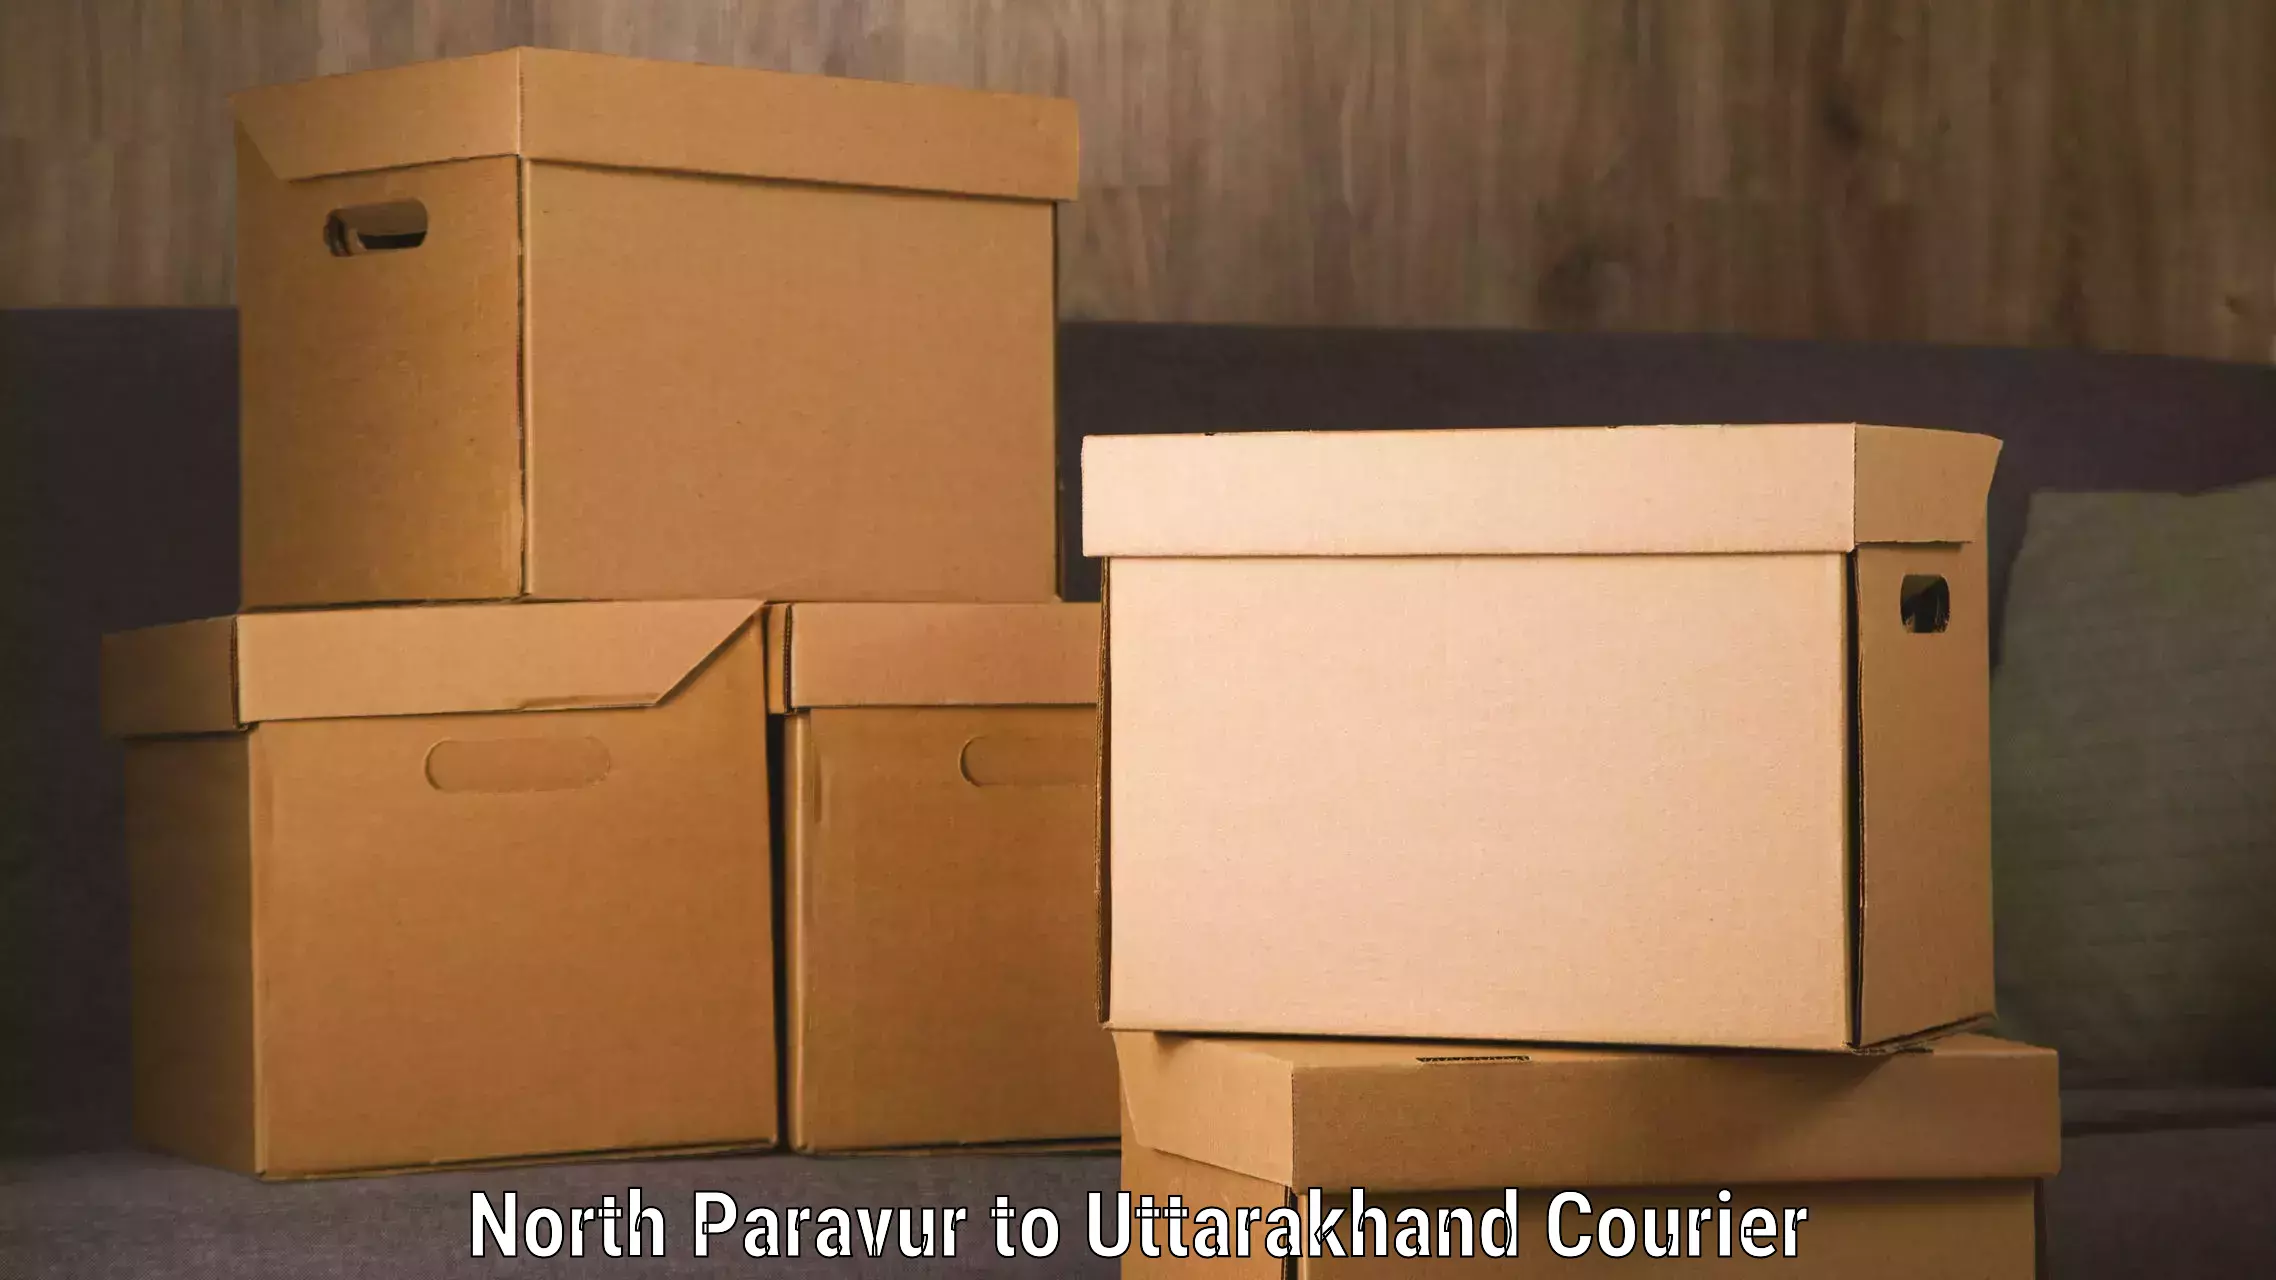 Modern courier technology North Paravur to IIT Roorkee